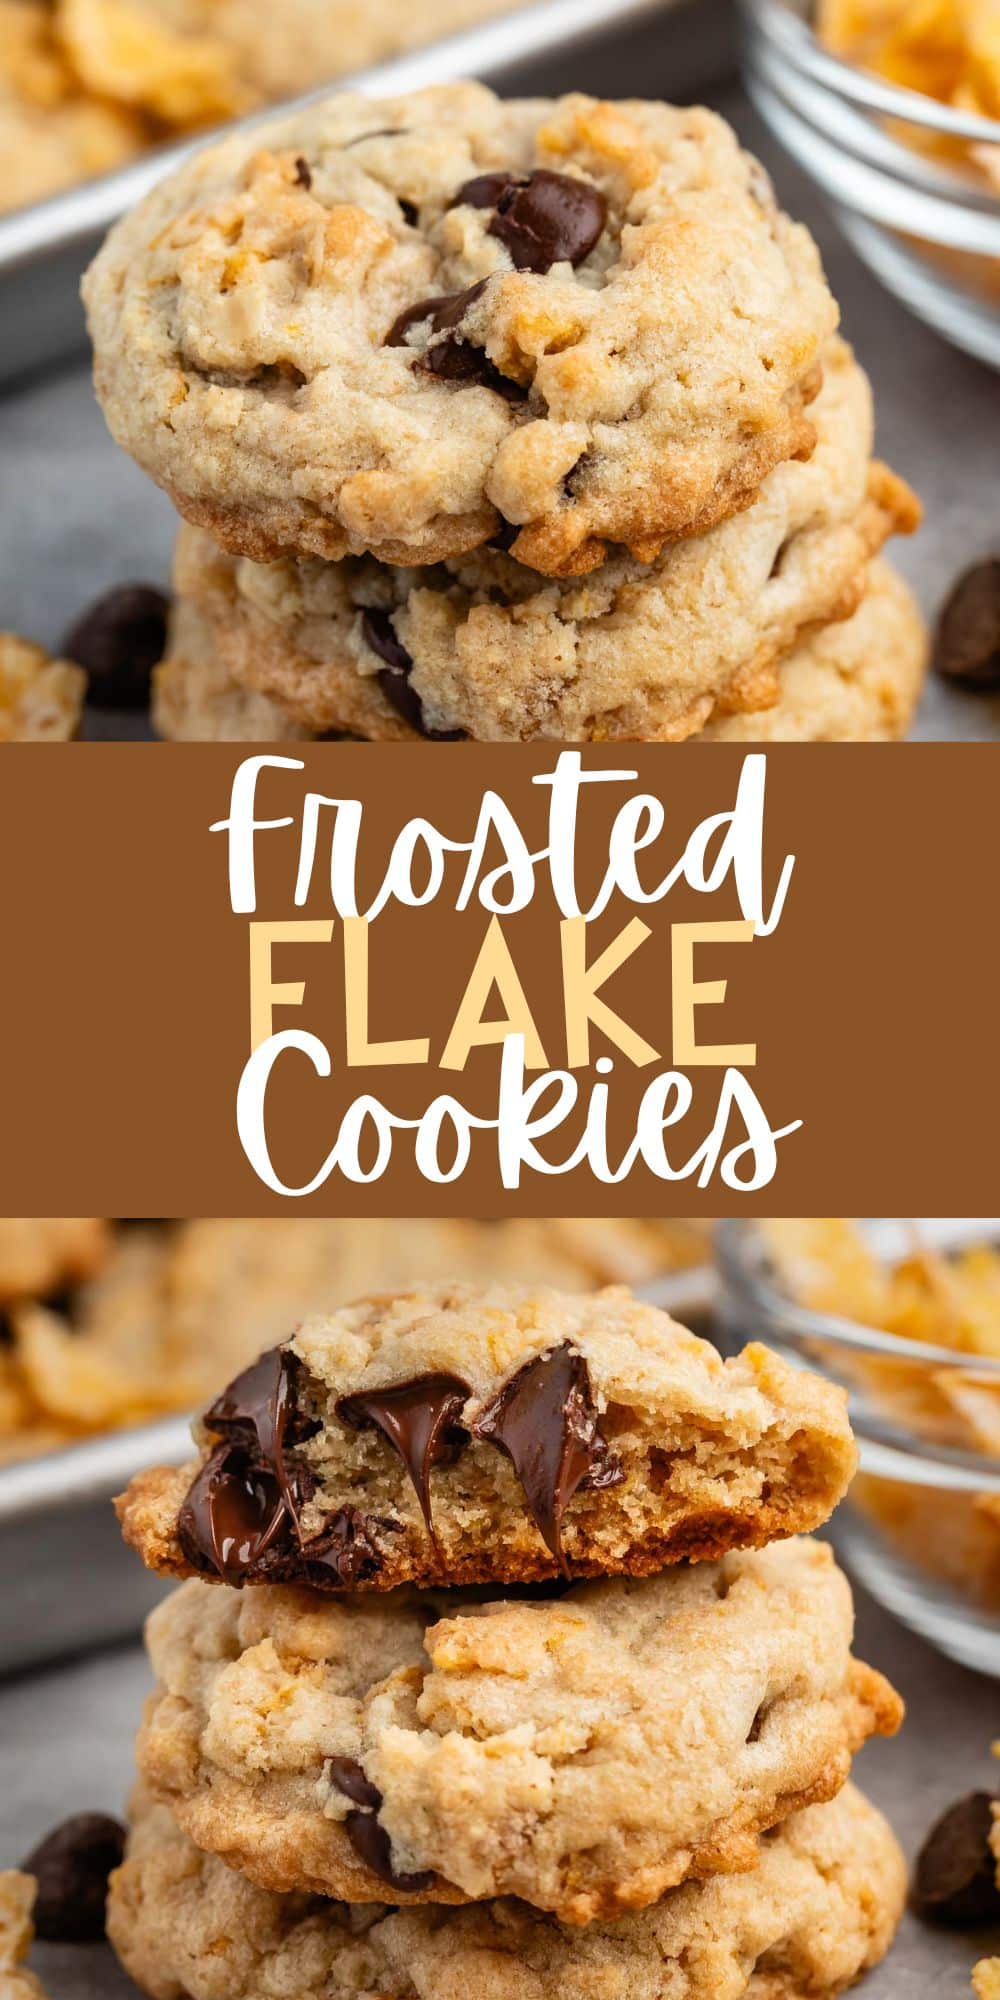 two photos stacked cookies with Frosted Flakes and chocolate chips baked with words on the image.